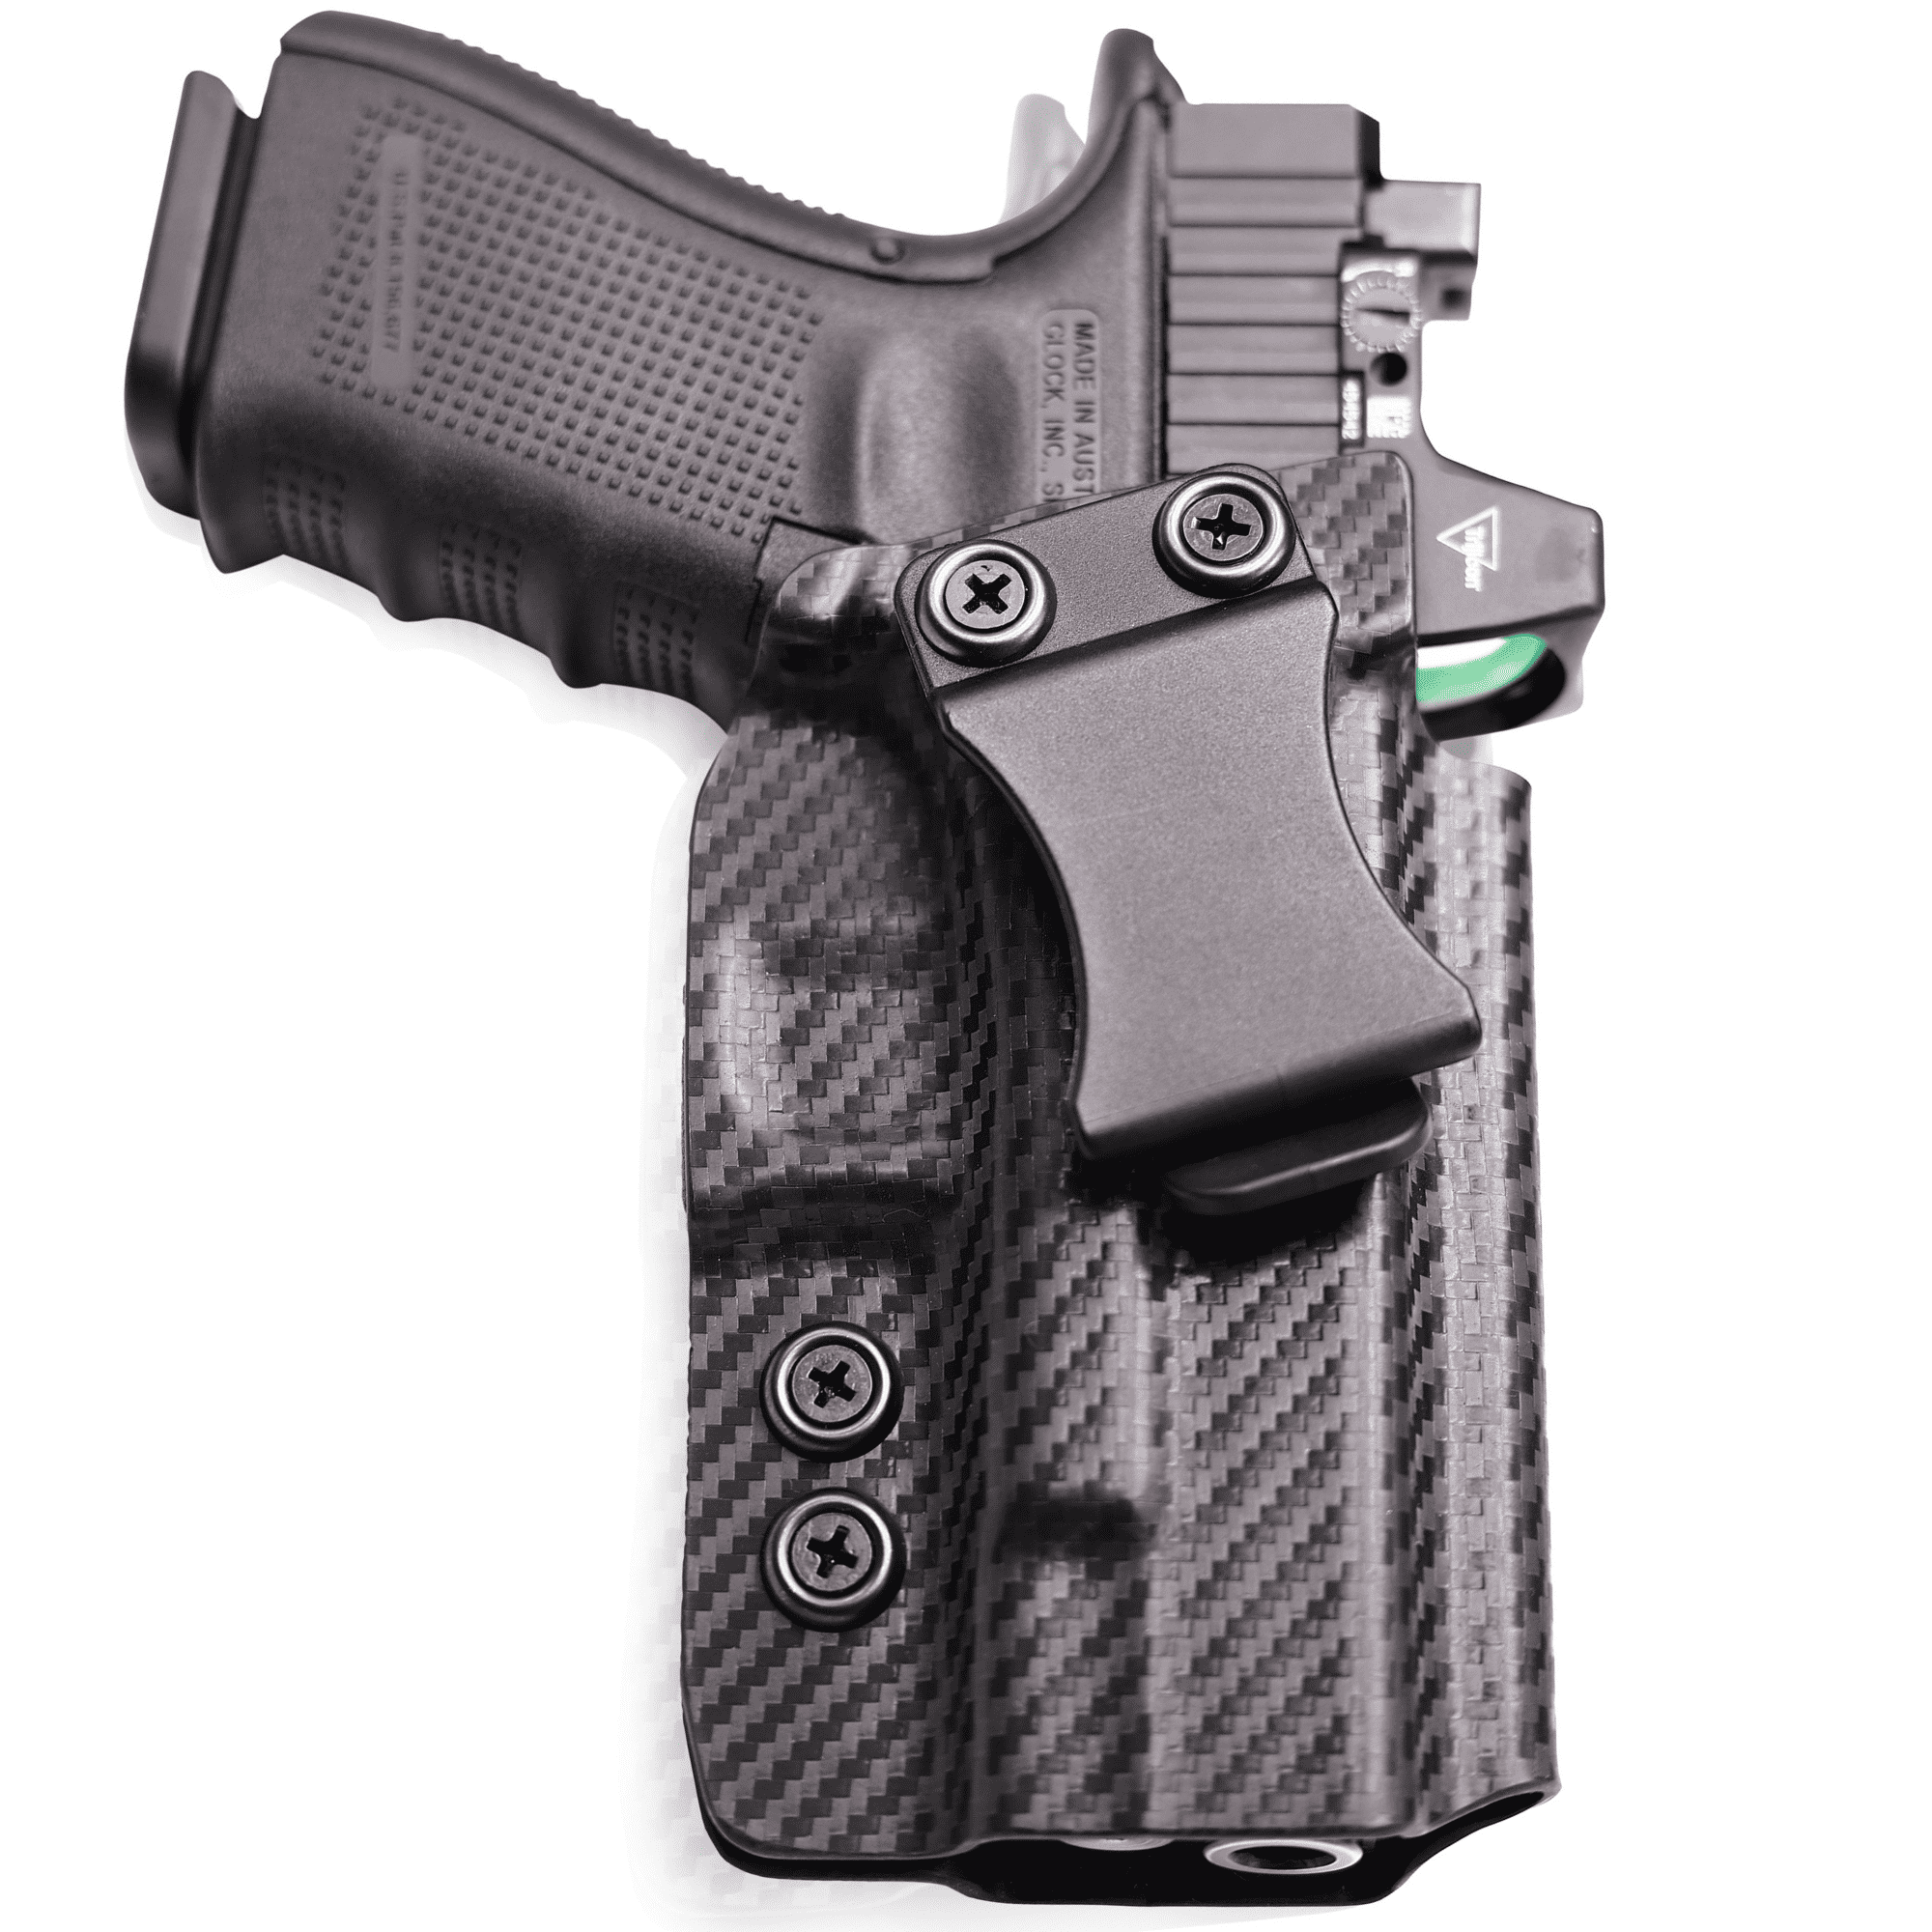 4. Factors to Consider When Choosing a Holster for Optics